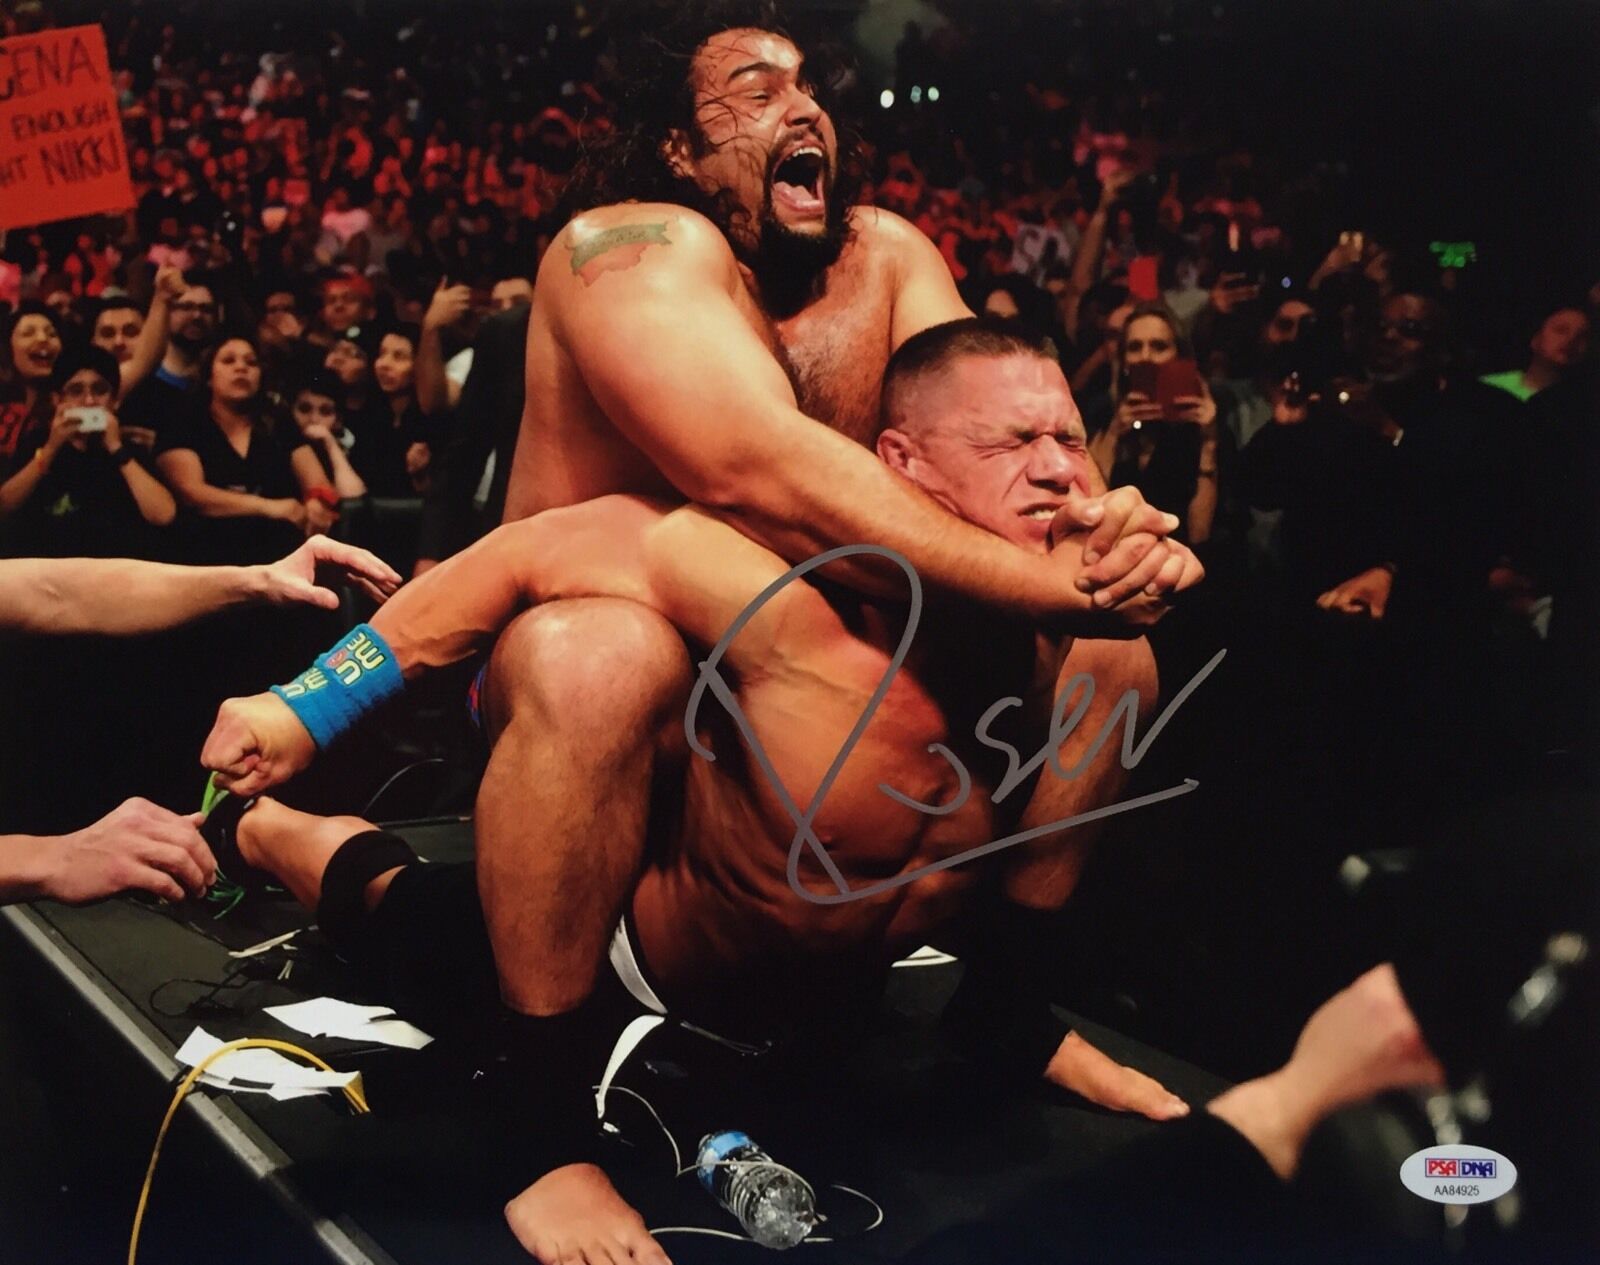 Alexander Rusev Signed Autographed 11x14 Wrestling Photo Poster painting PSA AA84925